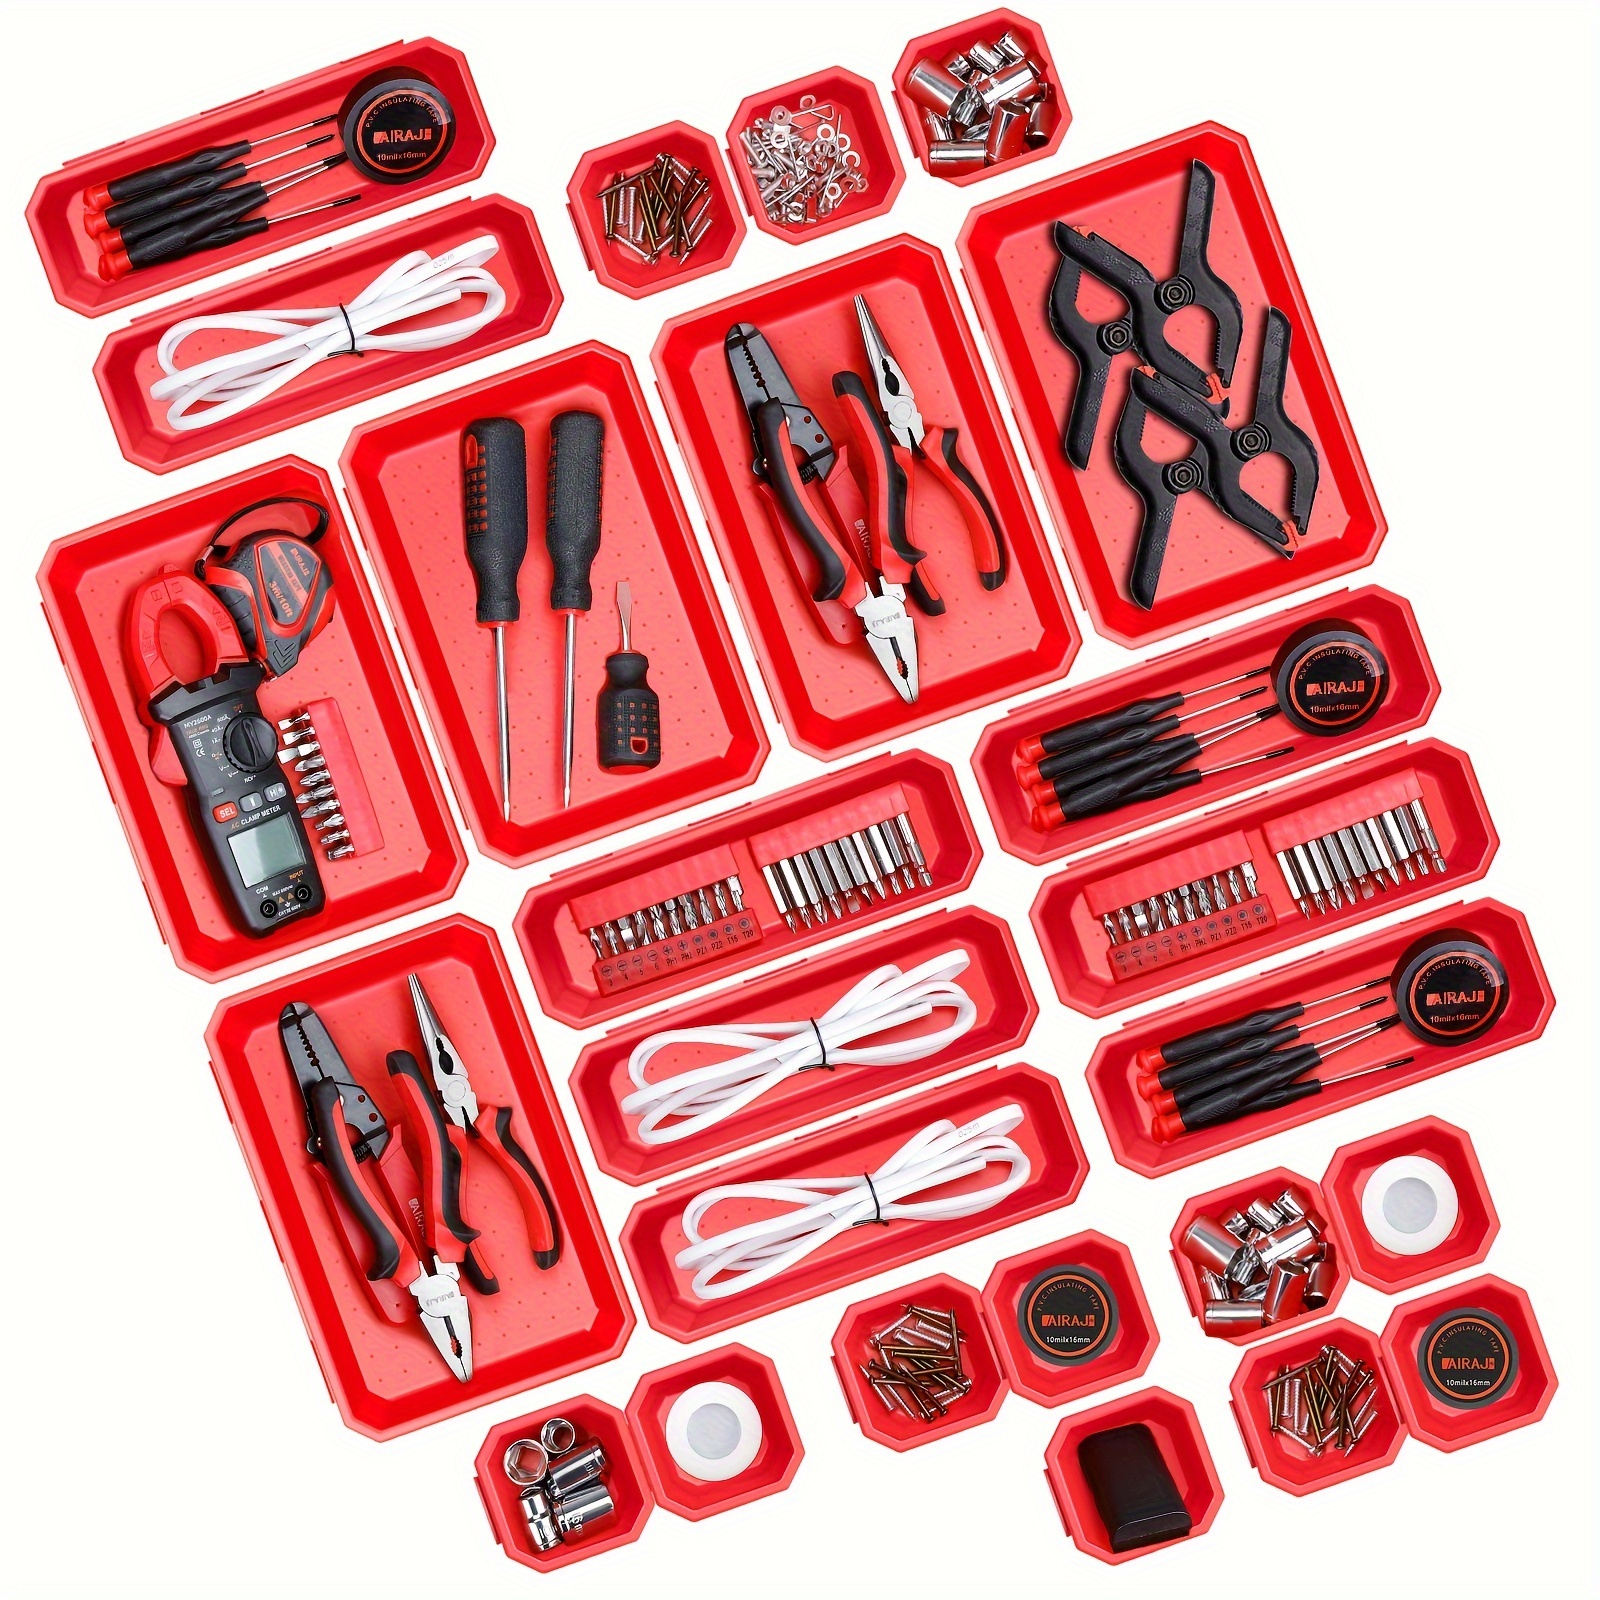 

9pcs/set Airaj Multifunctional Tool Box Organisers Pp Material For Organisation And Storage Organiser For Drawers, Cupboards Etc. (red)